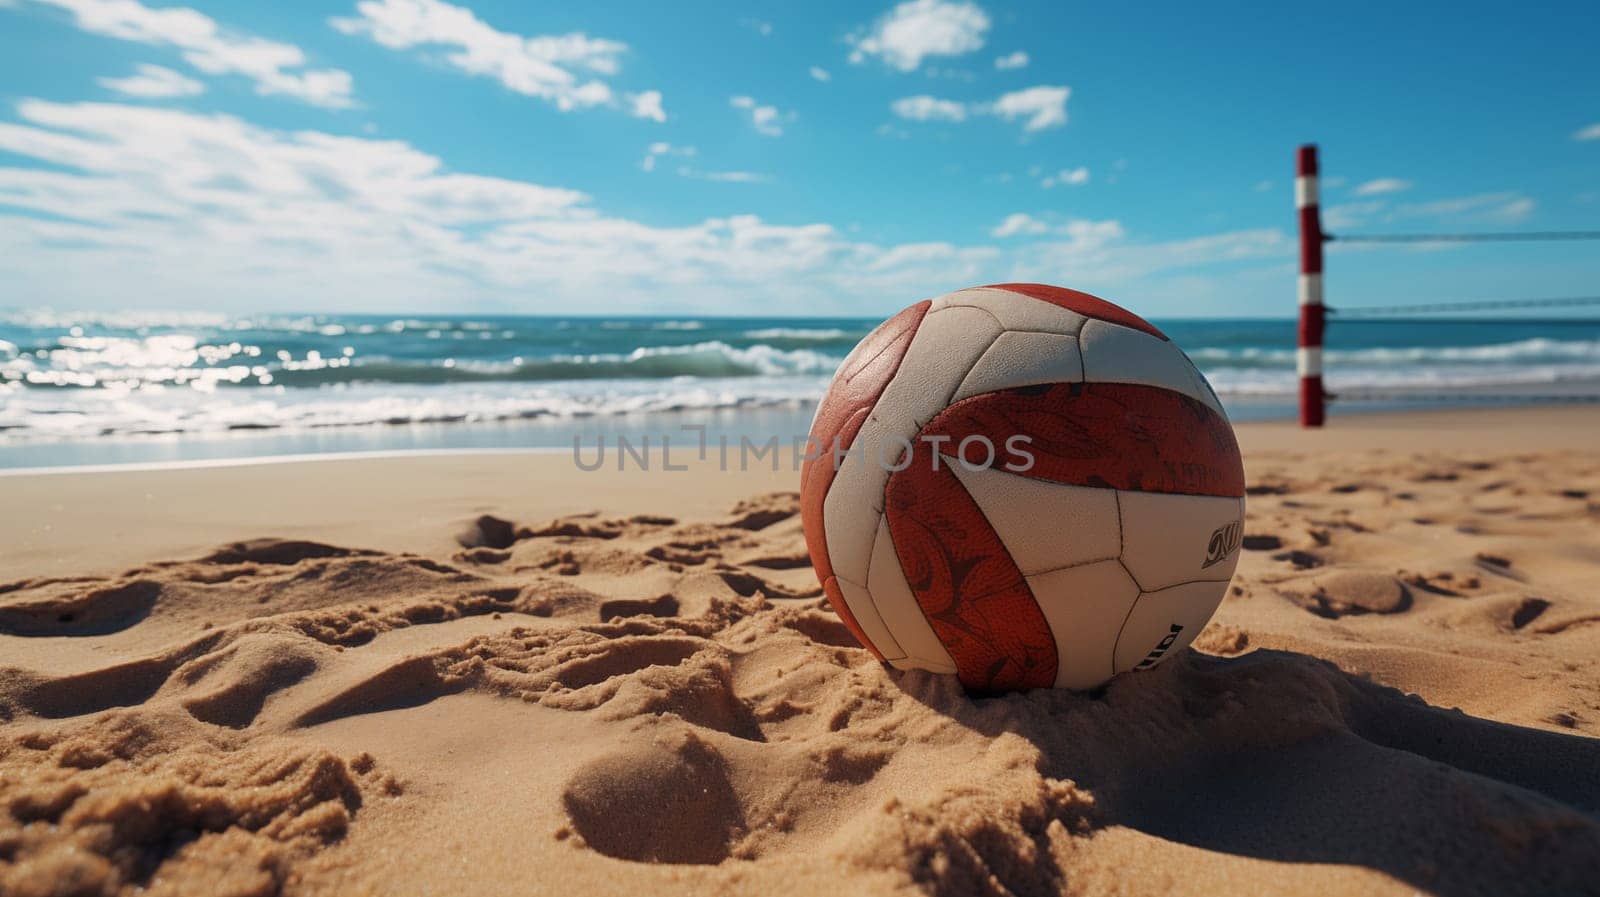 A white-brown volleyball lies on a sandy beach by Zakharova